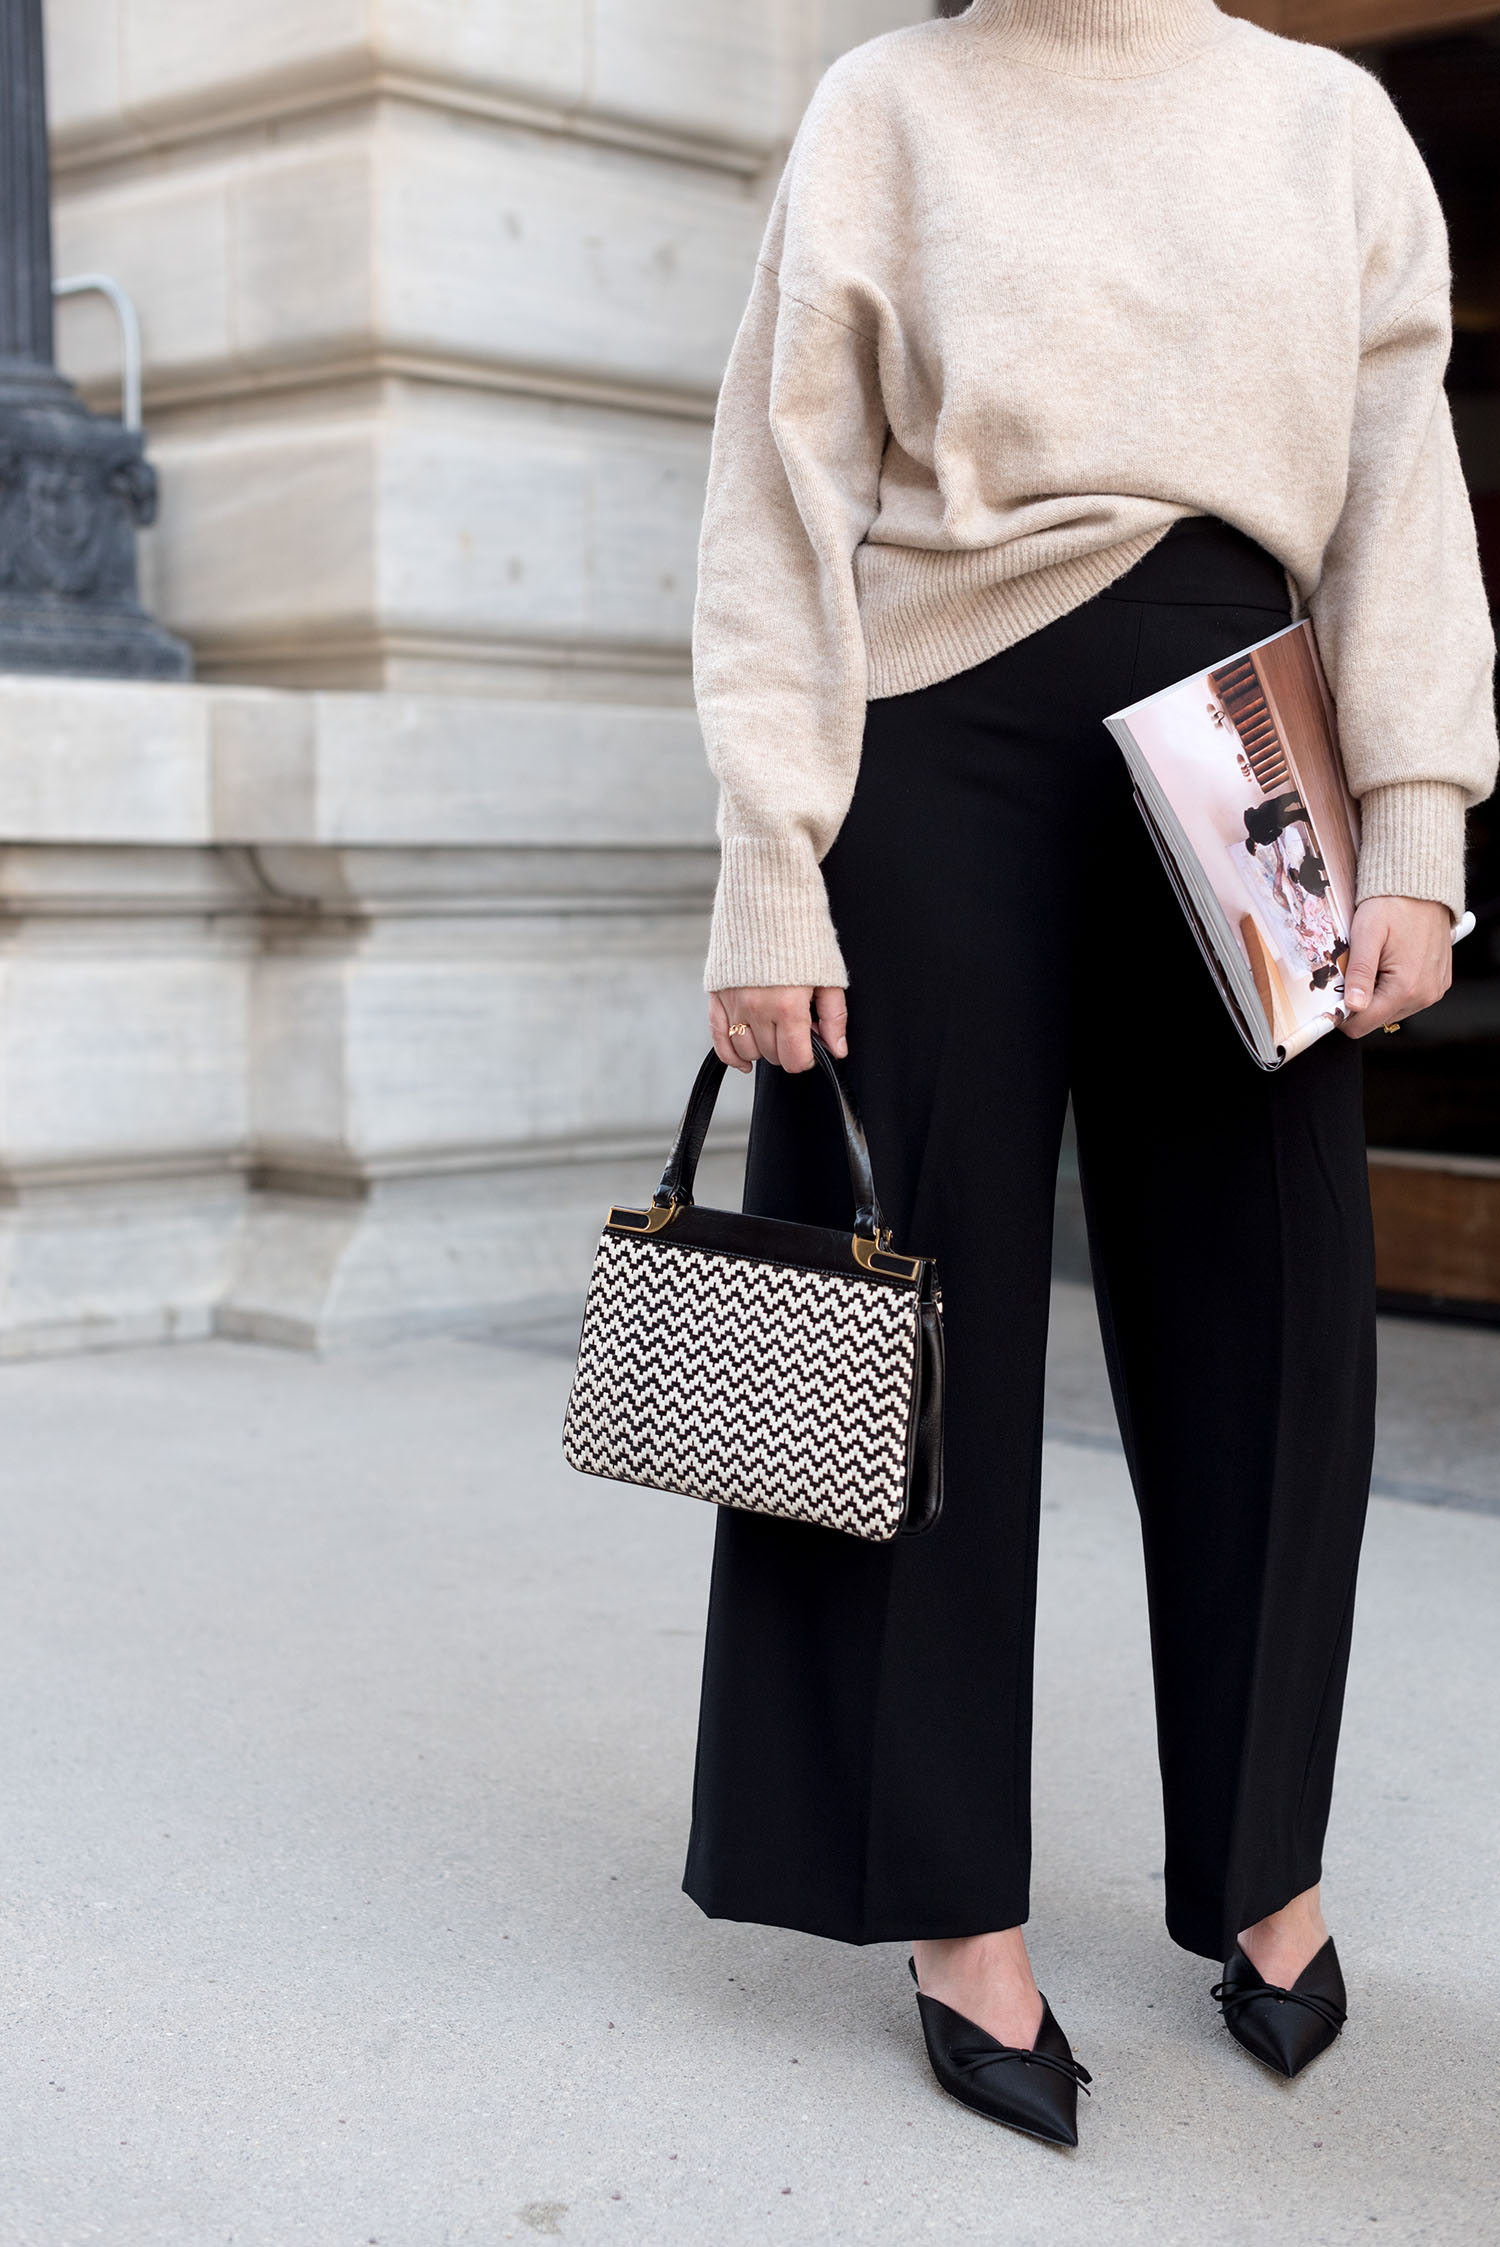 Outfit details on top Canadian fashion blogger Cee Fardoe of Coco & Vera, who carries a copy of Vogue magazine, including Balenciaga satin knife pumps and a vintage handbag